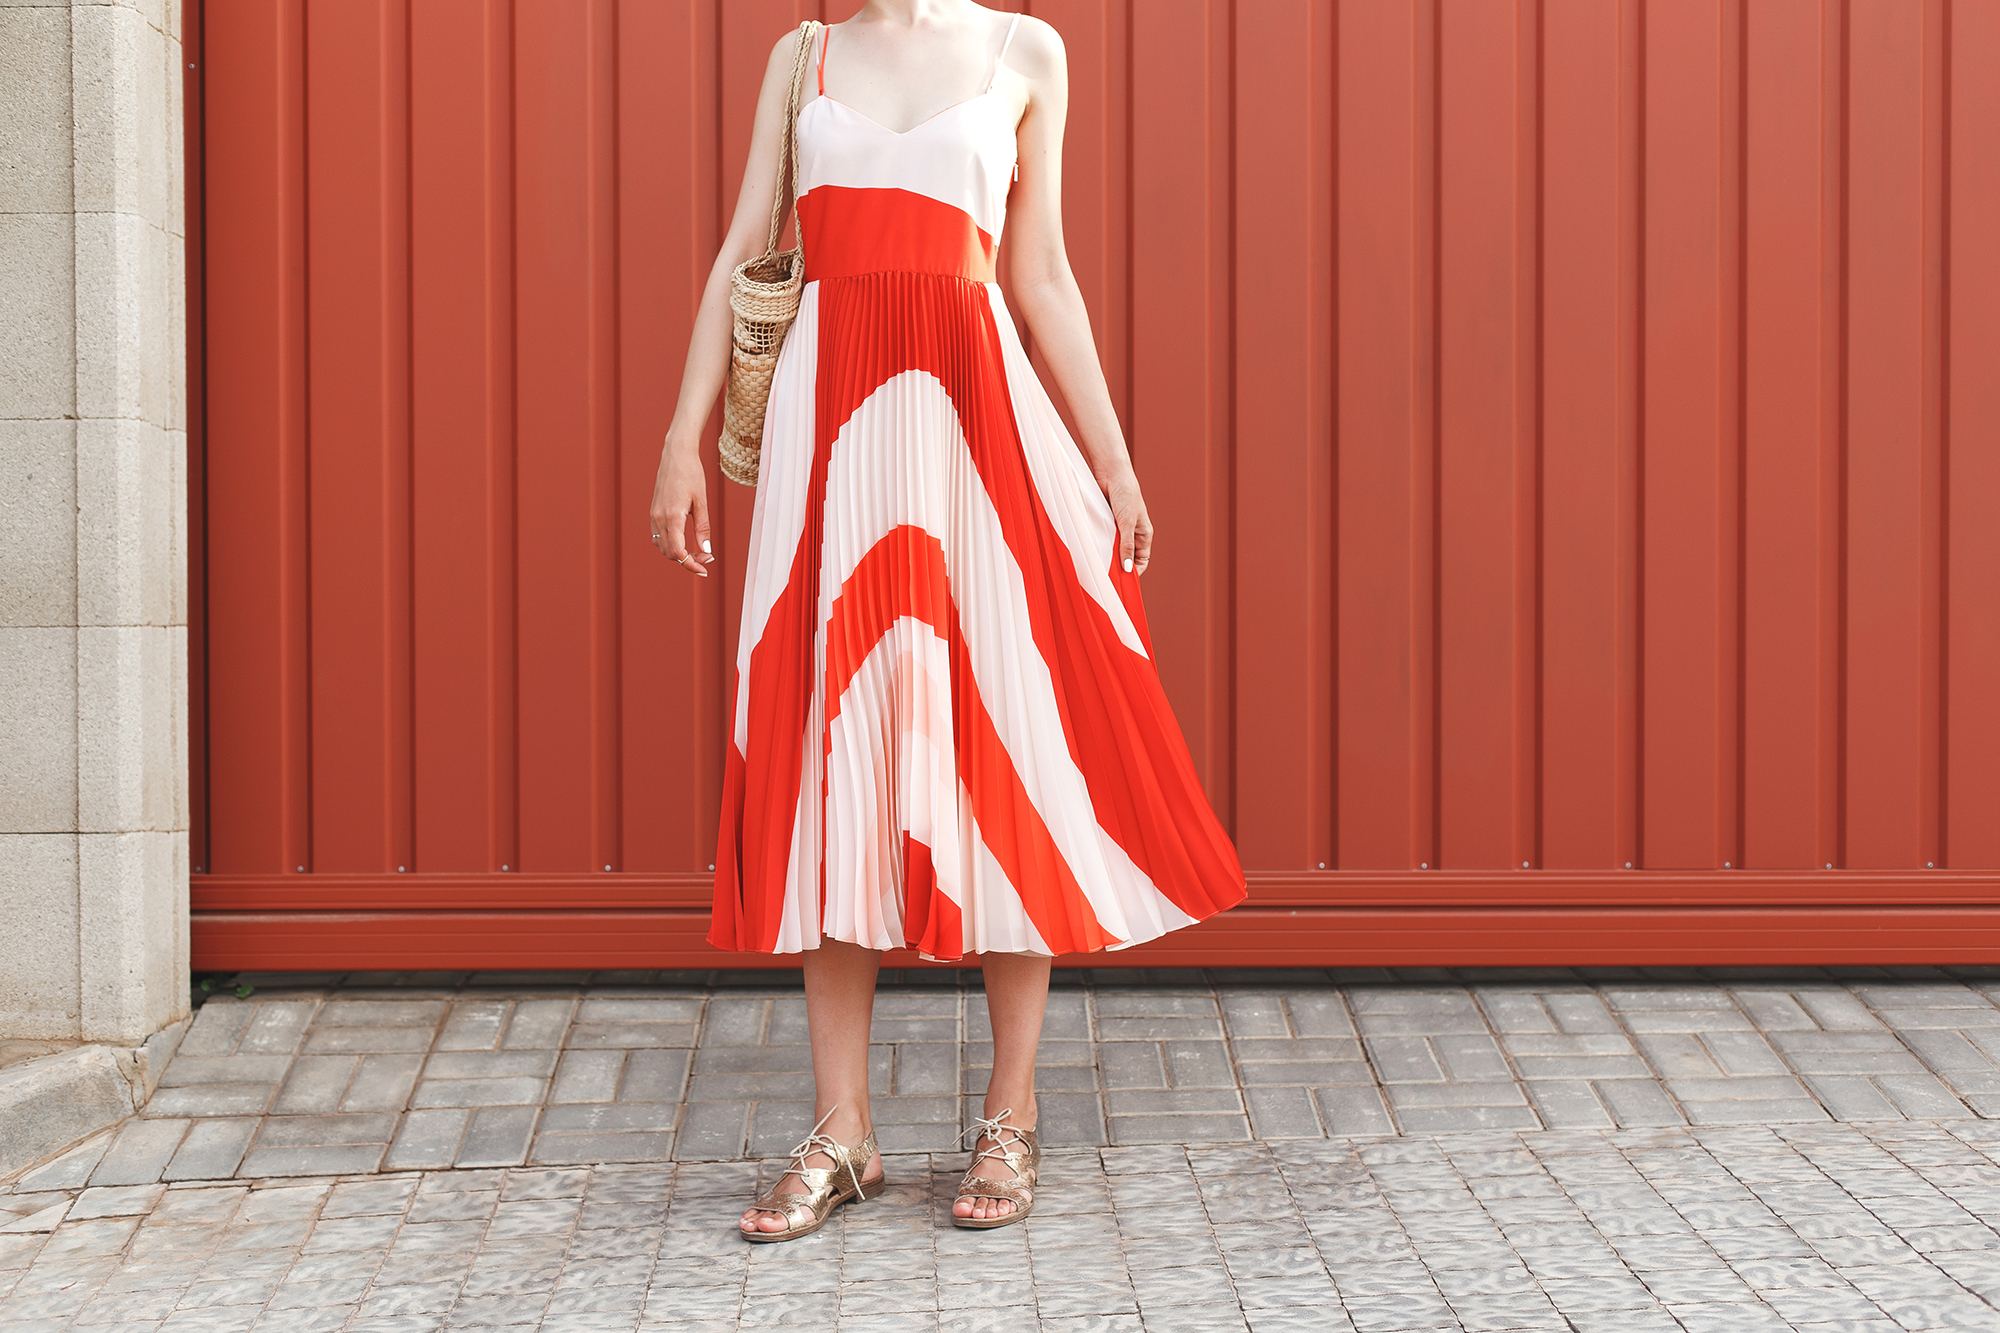 Update your wardrobe with M&S stylish and breathable summer dresses